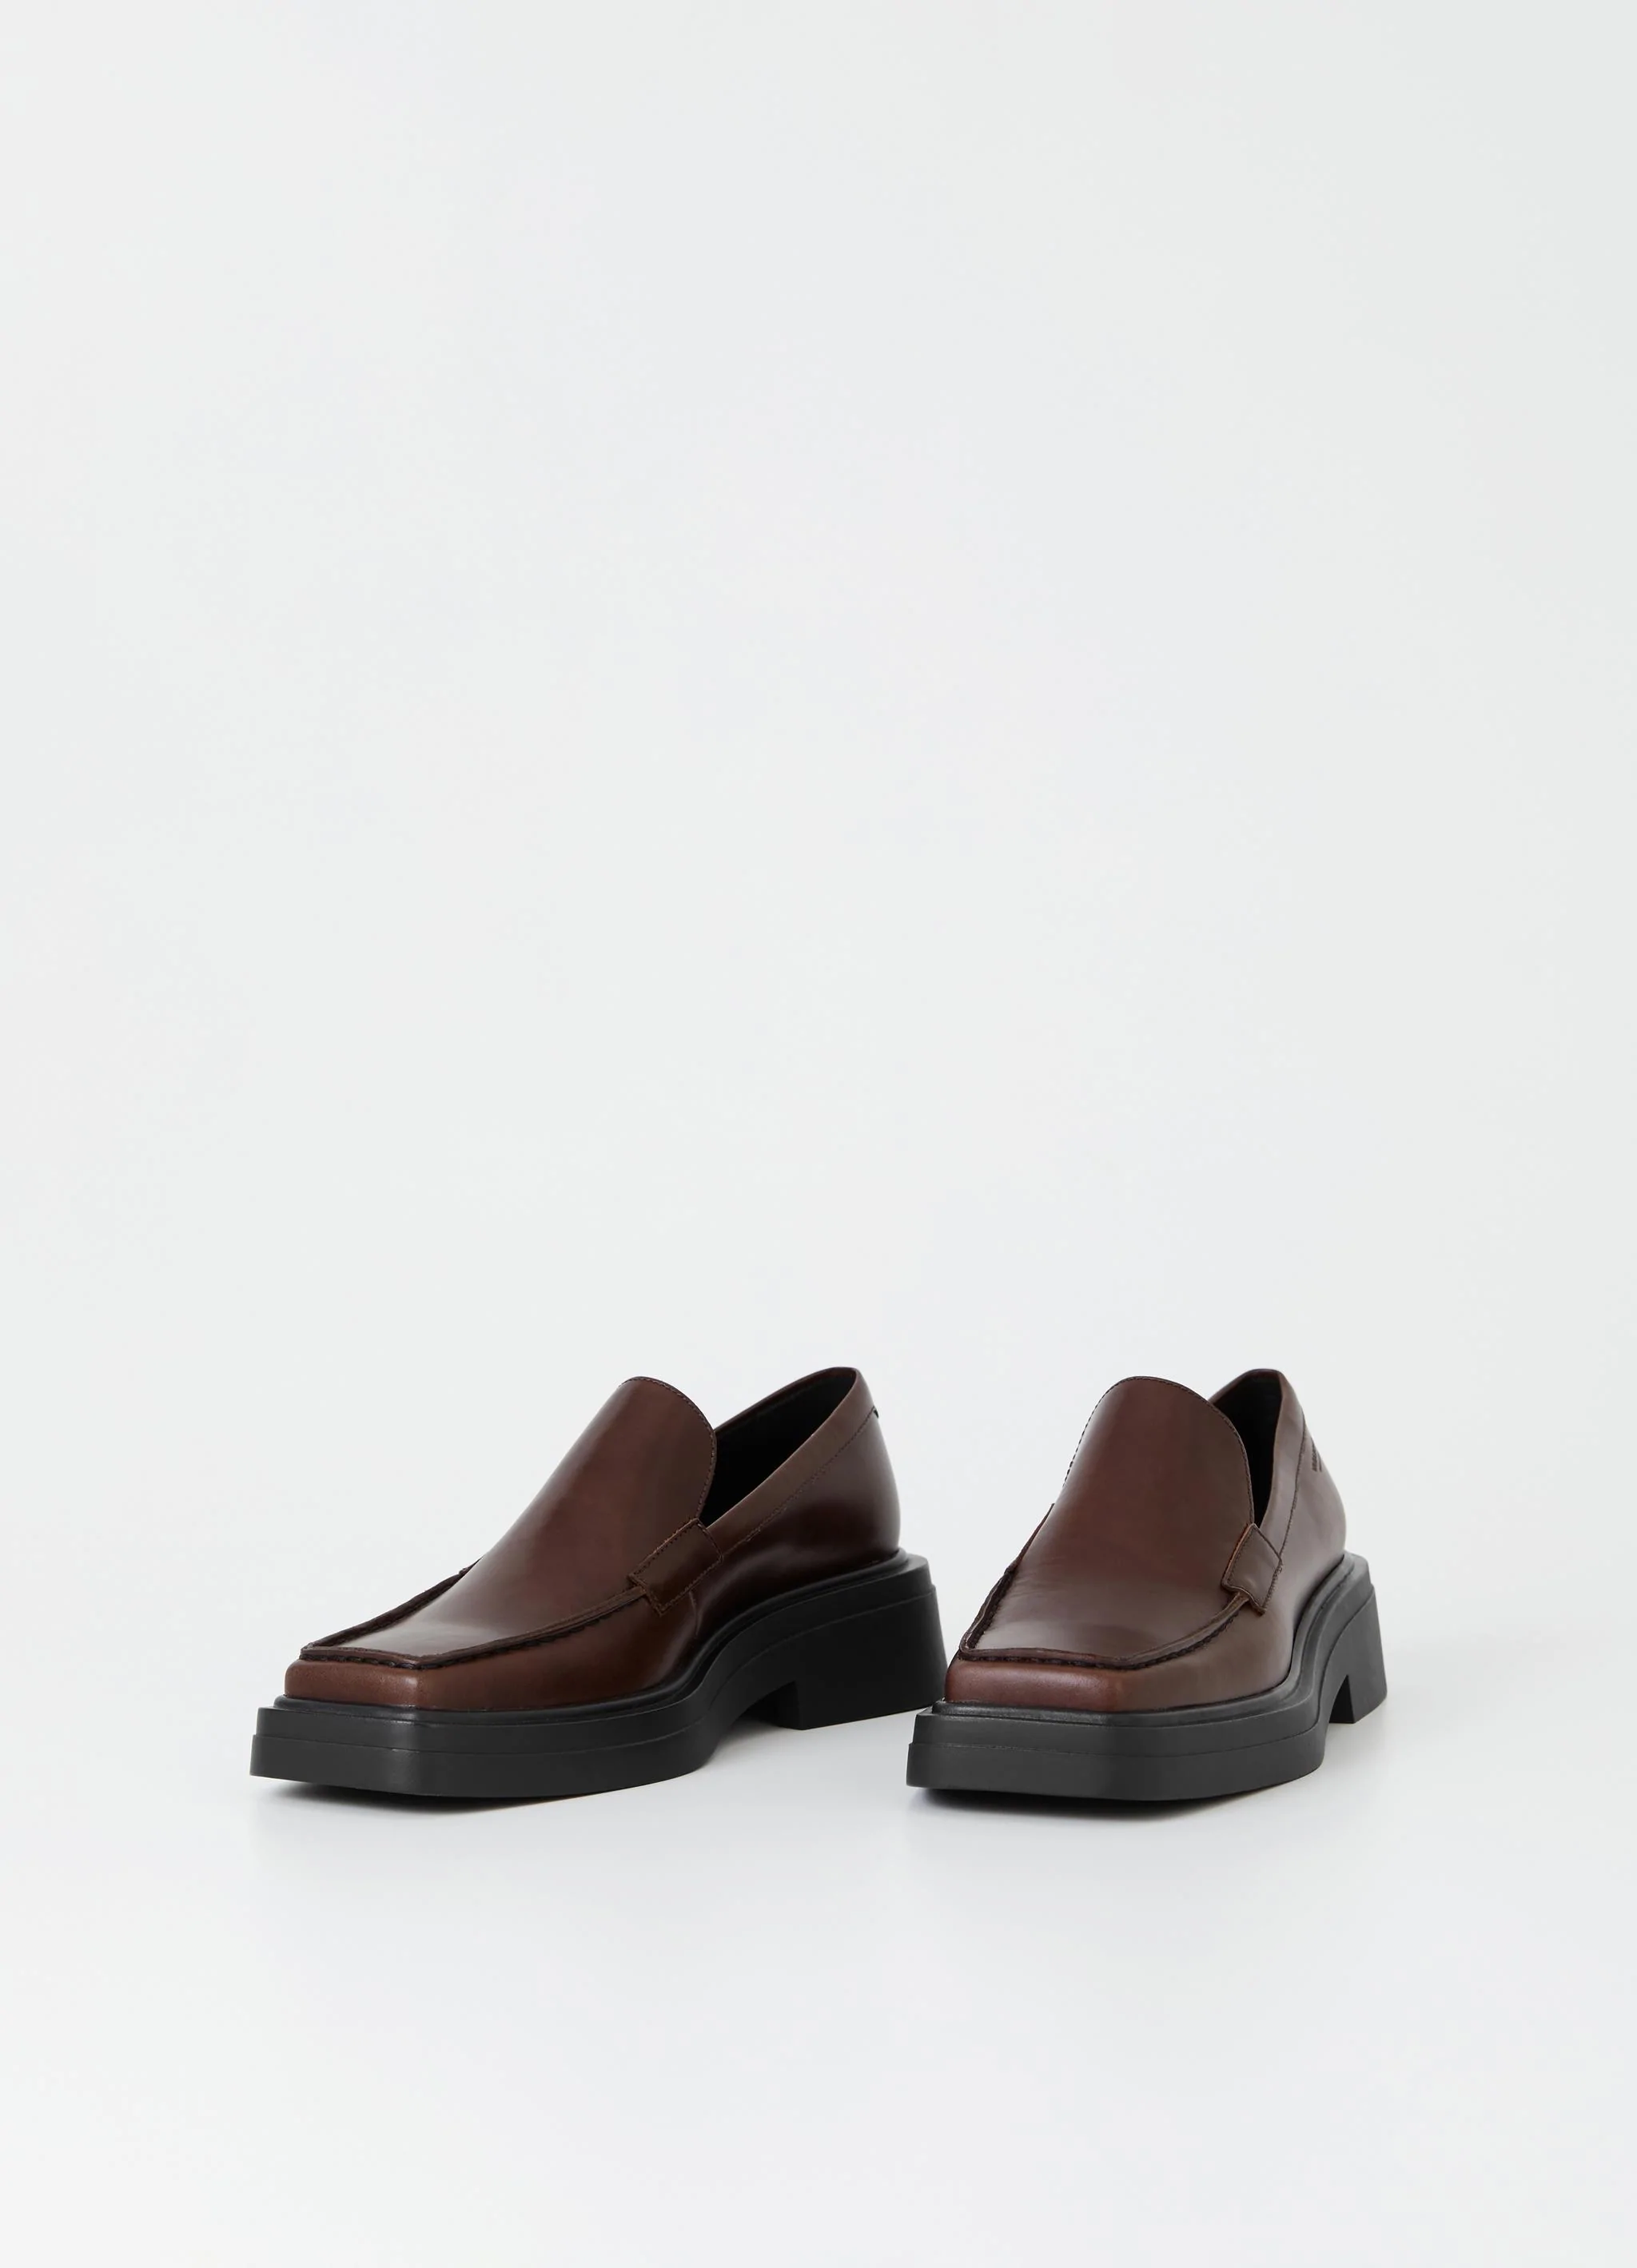 Product Image for Eyra Loafer, Brown